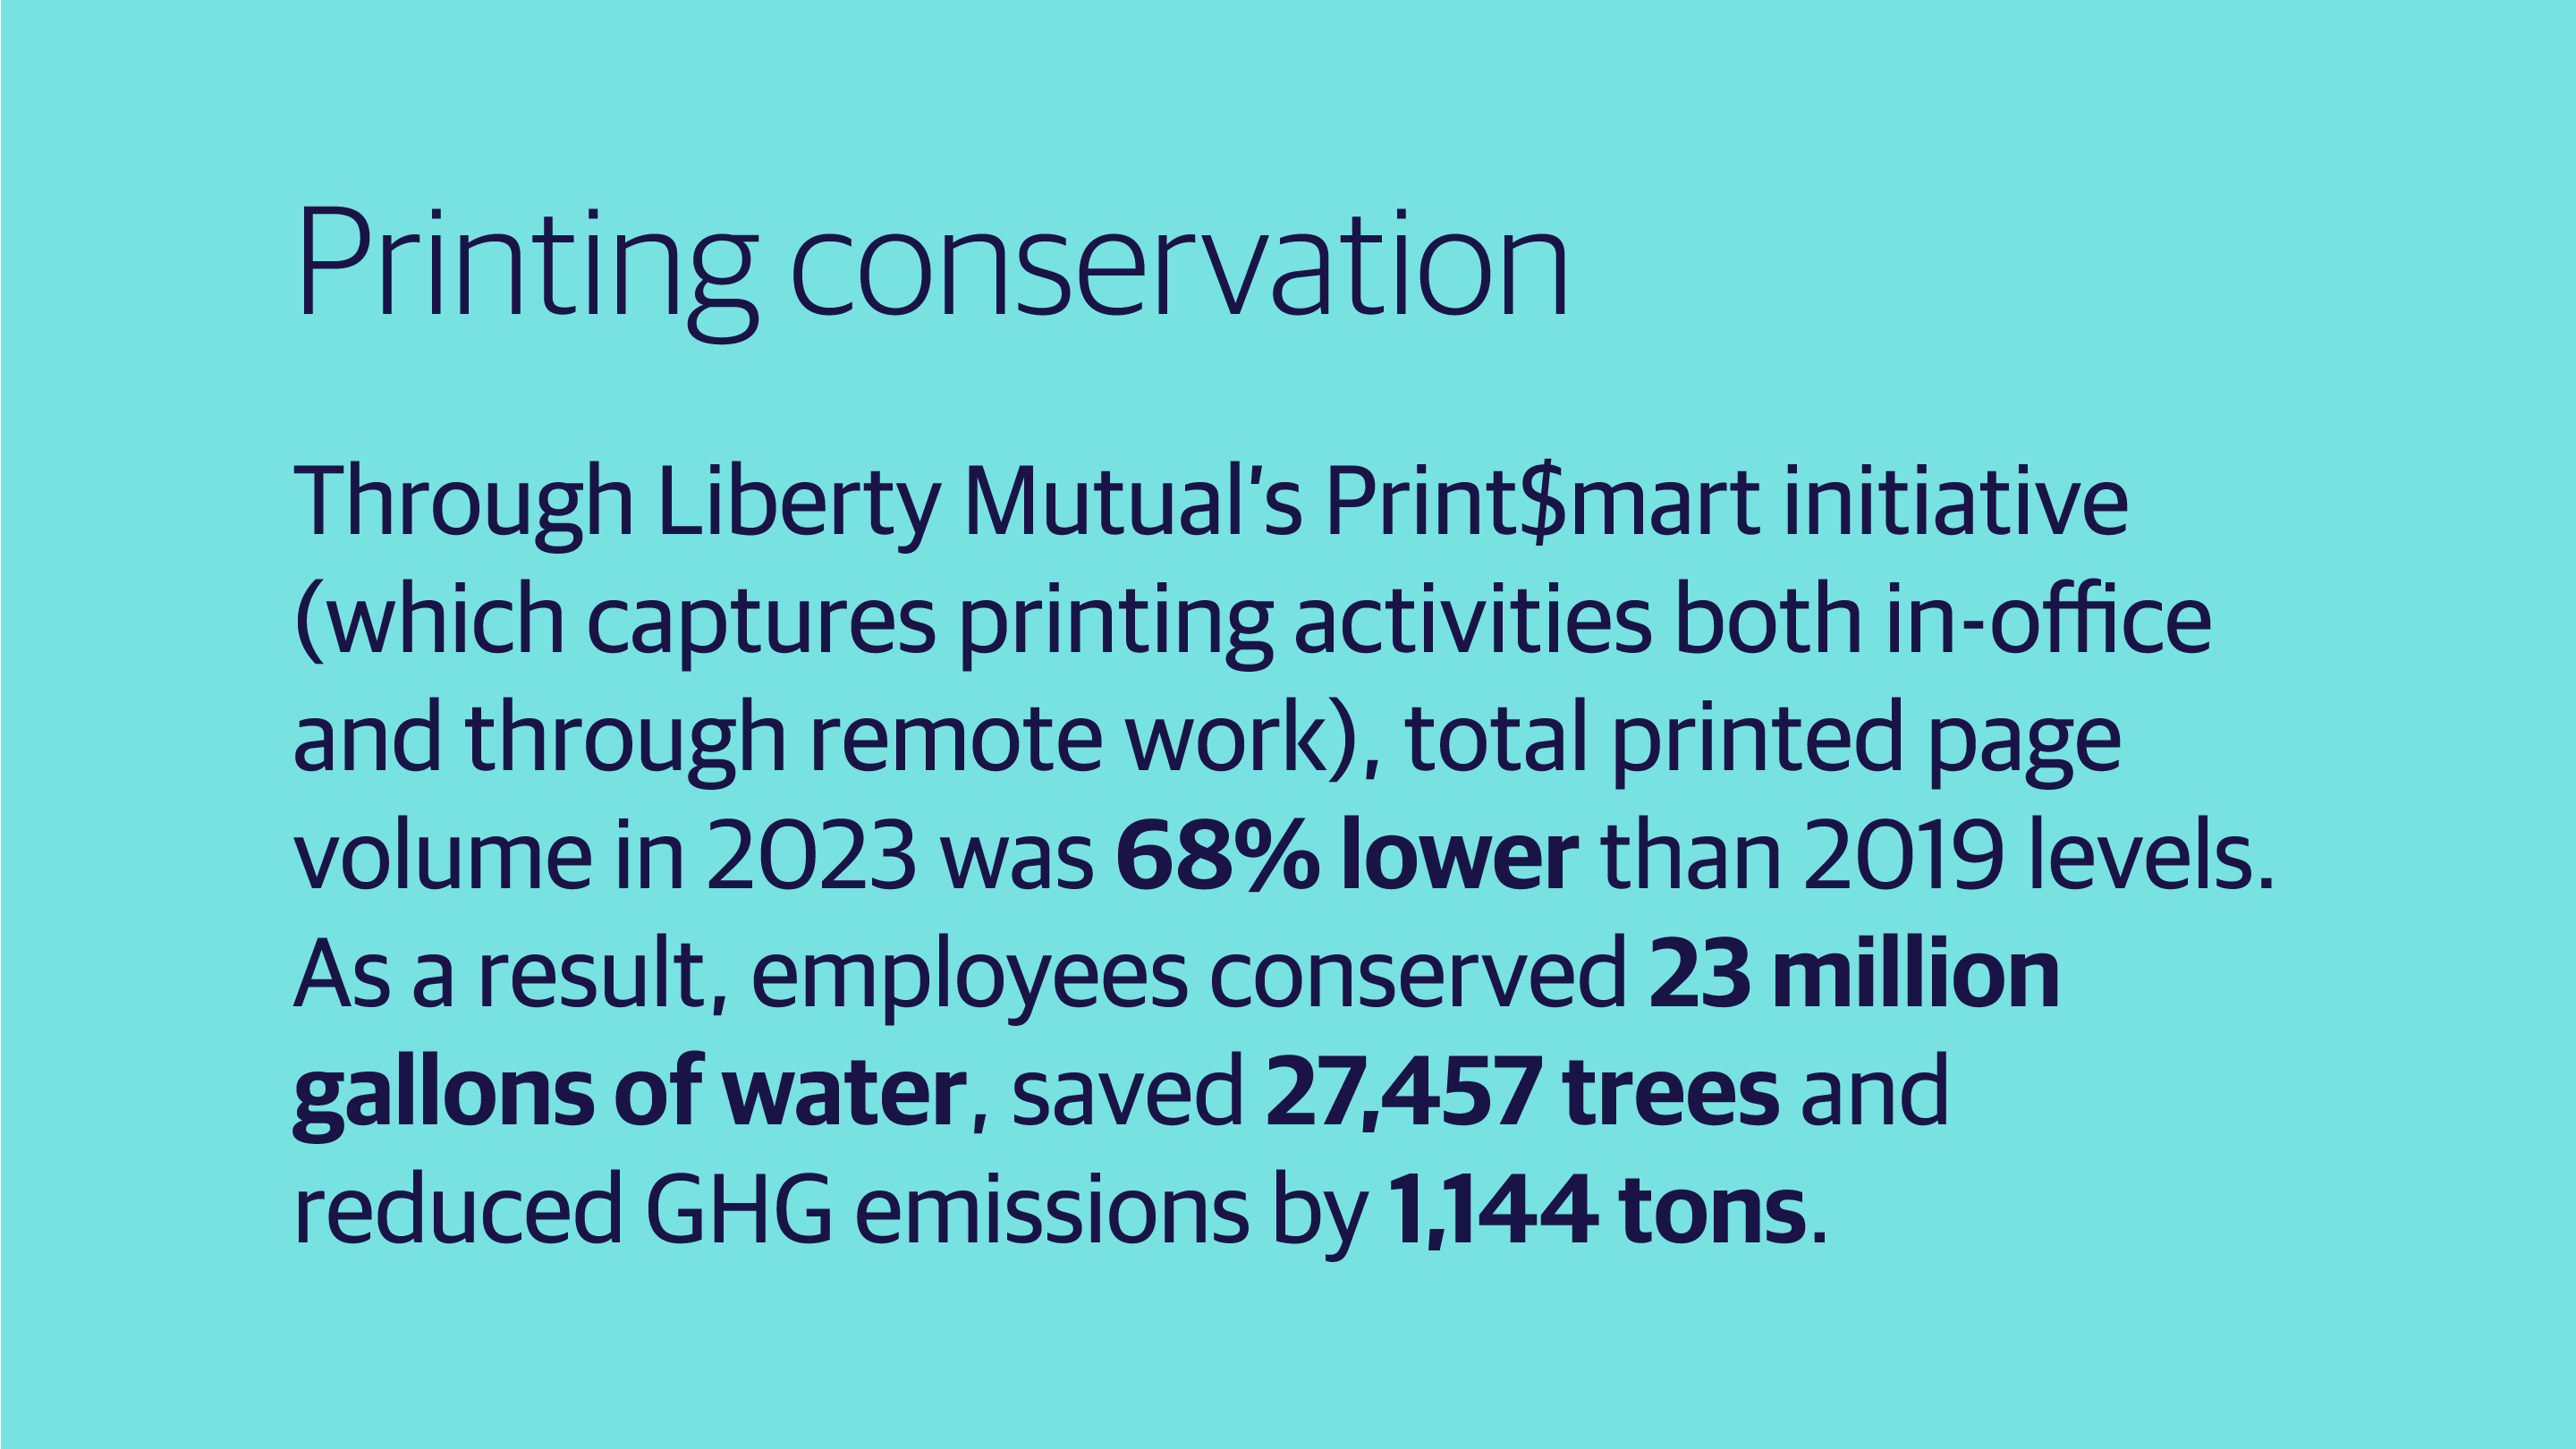 (slide 1 of 4) Printing conservation: Through Liberty Mutual’s Print$mart initiative (which captures printing activities both in-office and through remote work), total printed page volume in 2023 was 68% lower than 2019 levels. As a result, employees conserved 23 million gallons of water, saved 27,457 trees and reduced GHG emissions by 1,144 tons.  . 